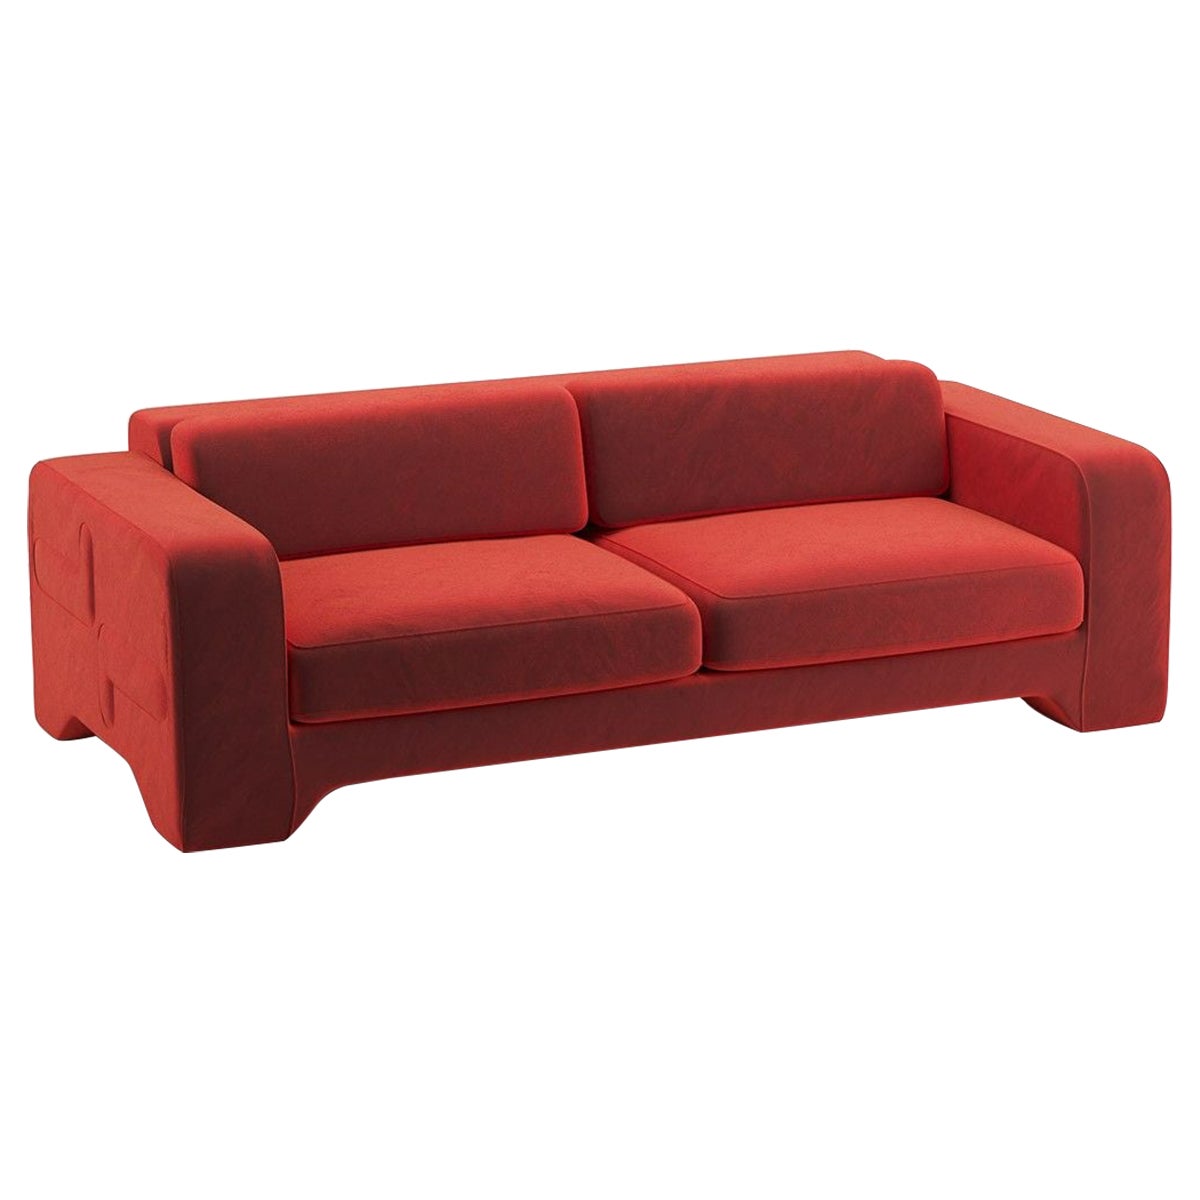 Popus Editions Giovanna 3 Seater Sofa in Vermilion Como Velvet Upholstery For Sale